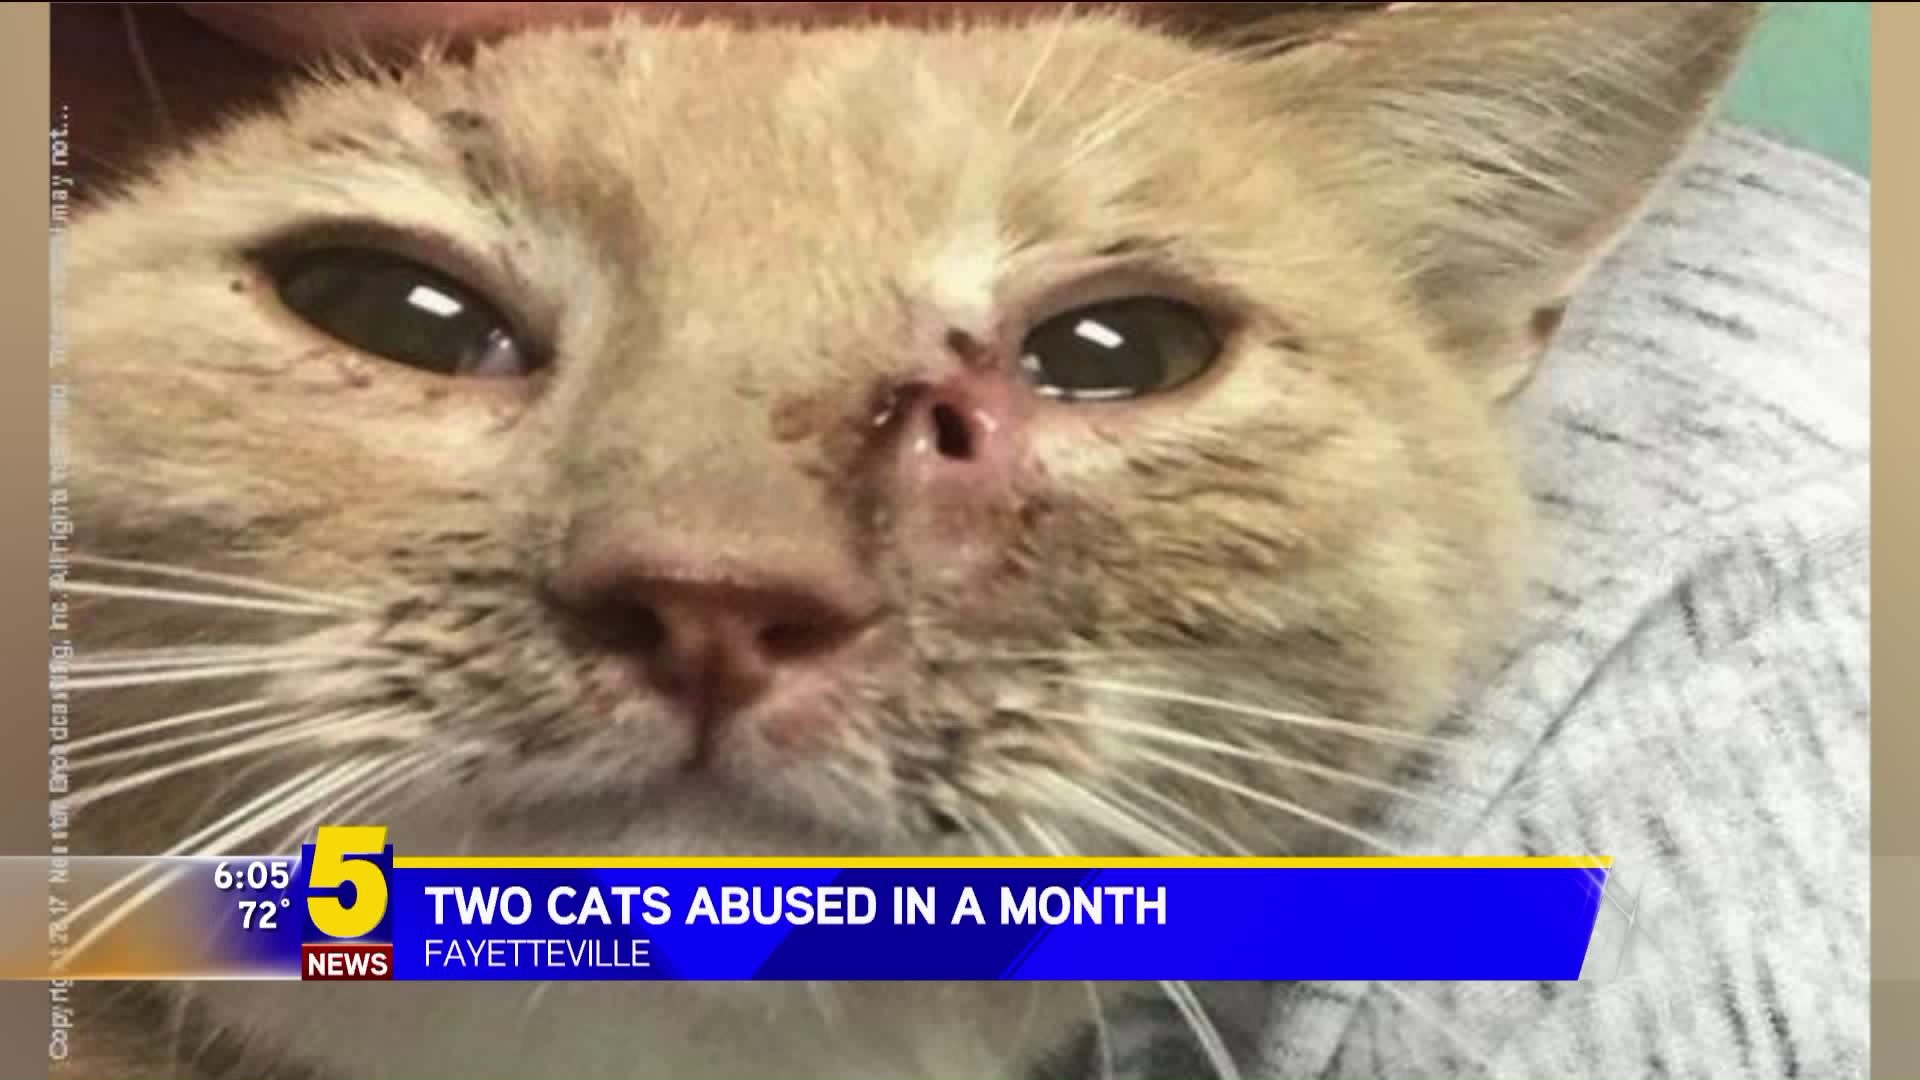 FAYETTEVILLE CAT ABUSE